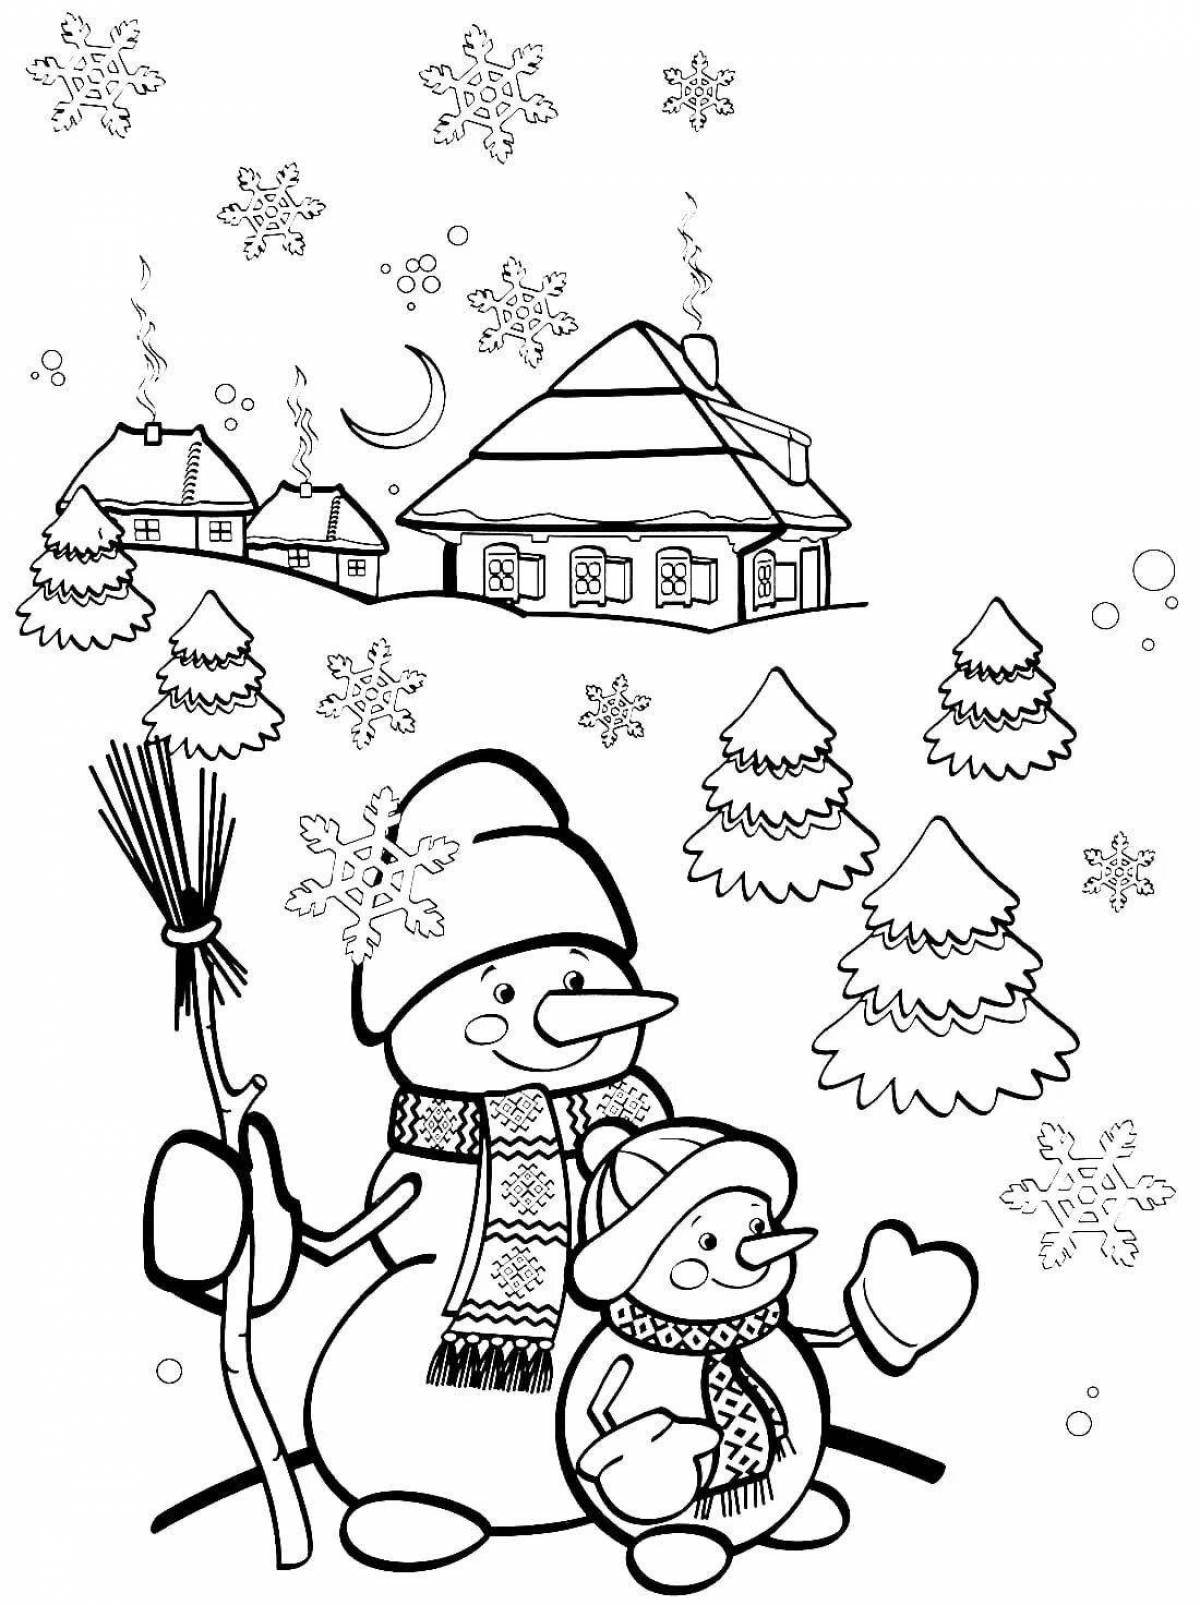 Playful snowman coloring book for kids 6-7 years old